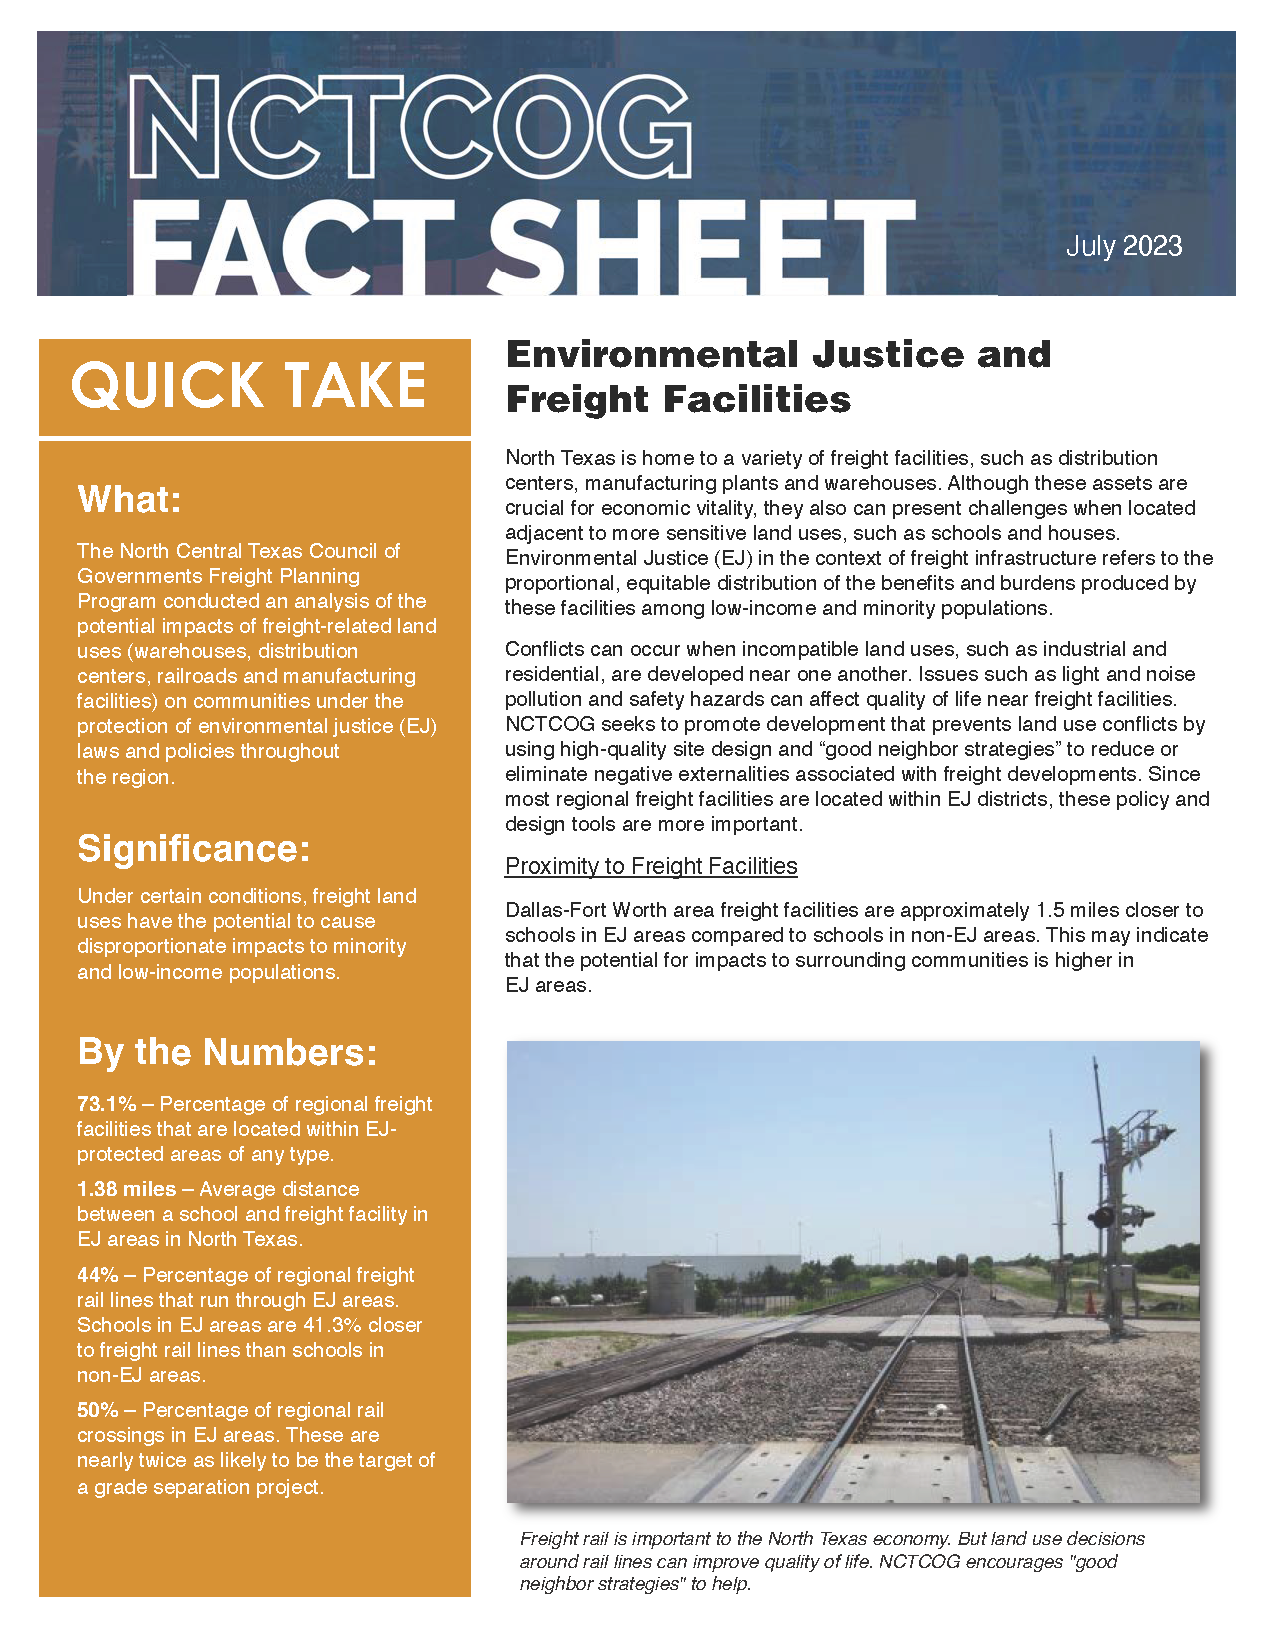 An image of the front page of the Environmental Justice and Freight Facilities page